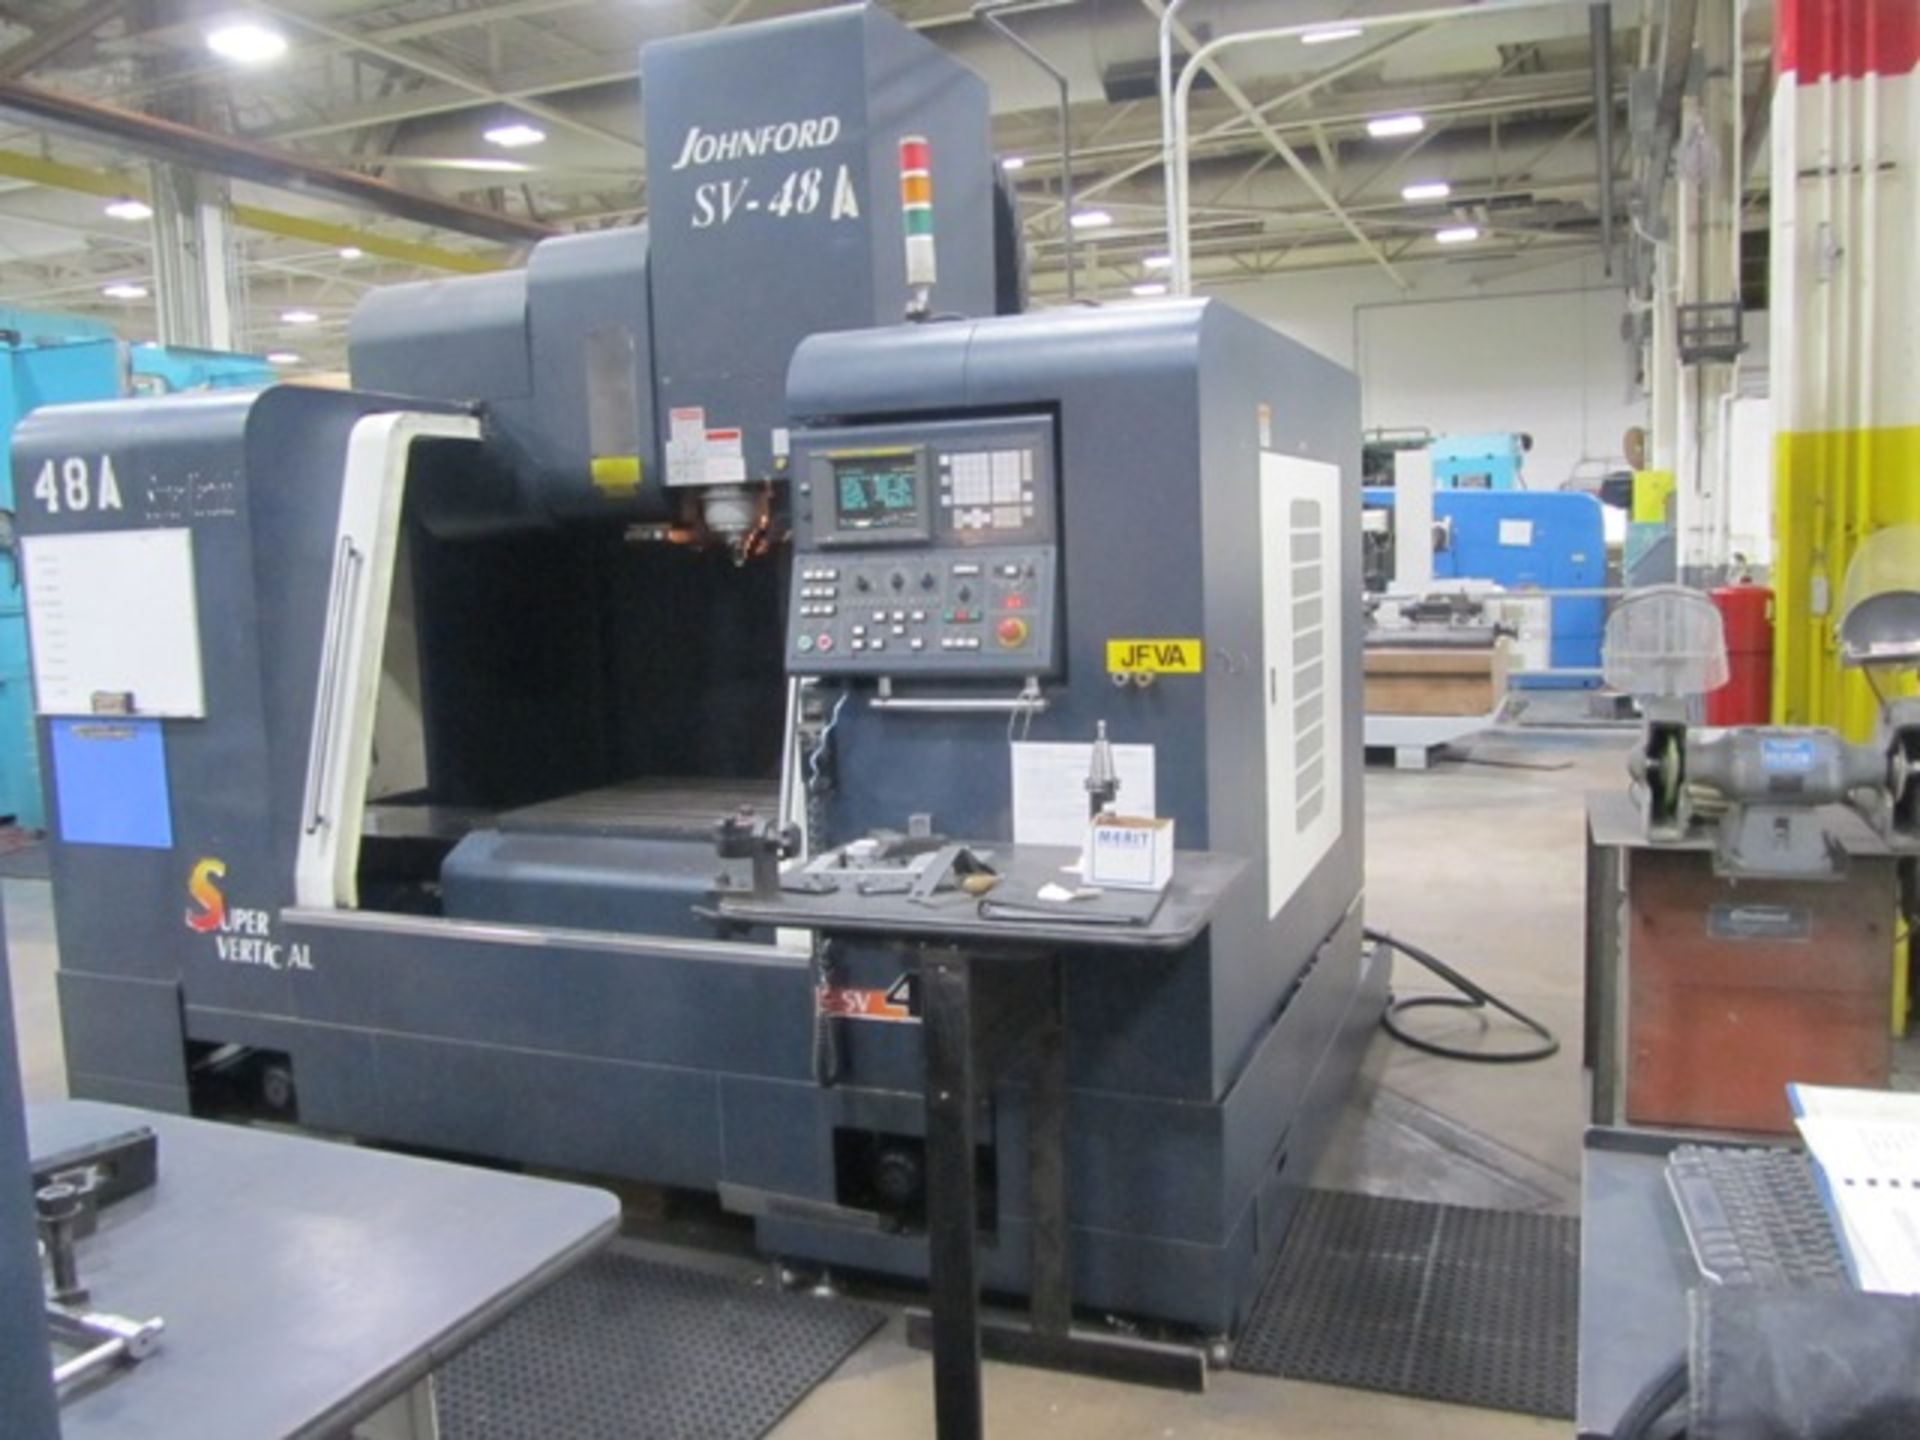 Johnford Model SV-48 Super 4-Axis CNC Vertical Machining Center with 10" Tsudakoma 4th Axis Rotary - Image 3 of 11